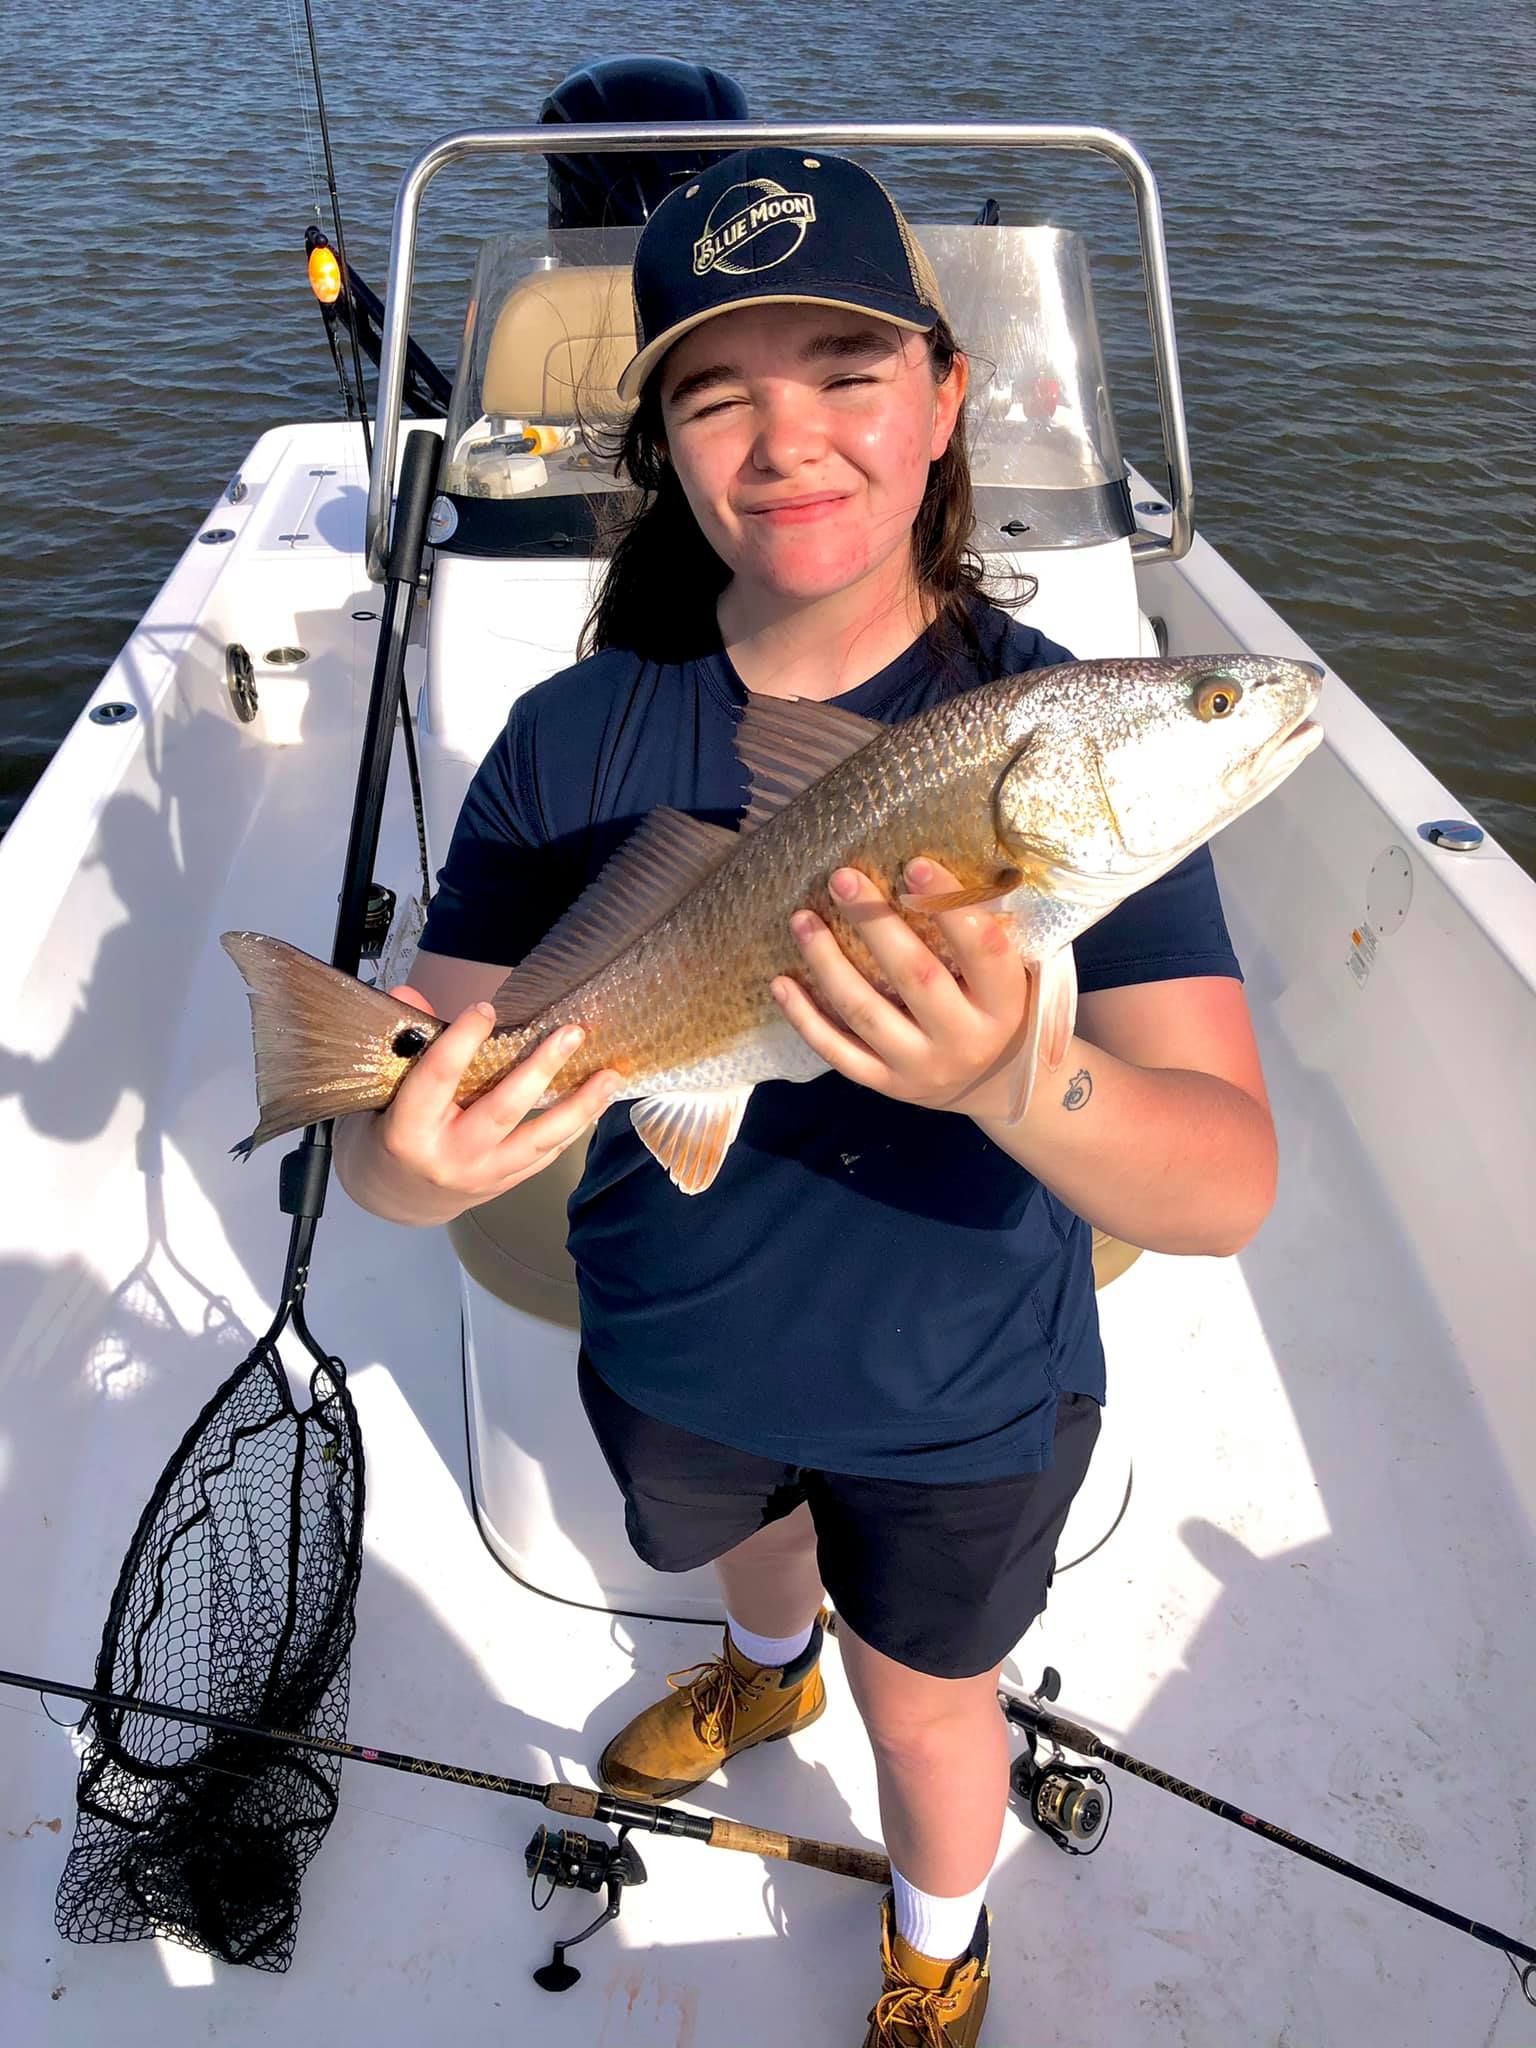 fun day trip with Get'n Hooked Inshore Adventures